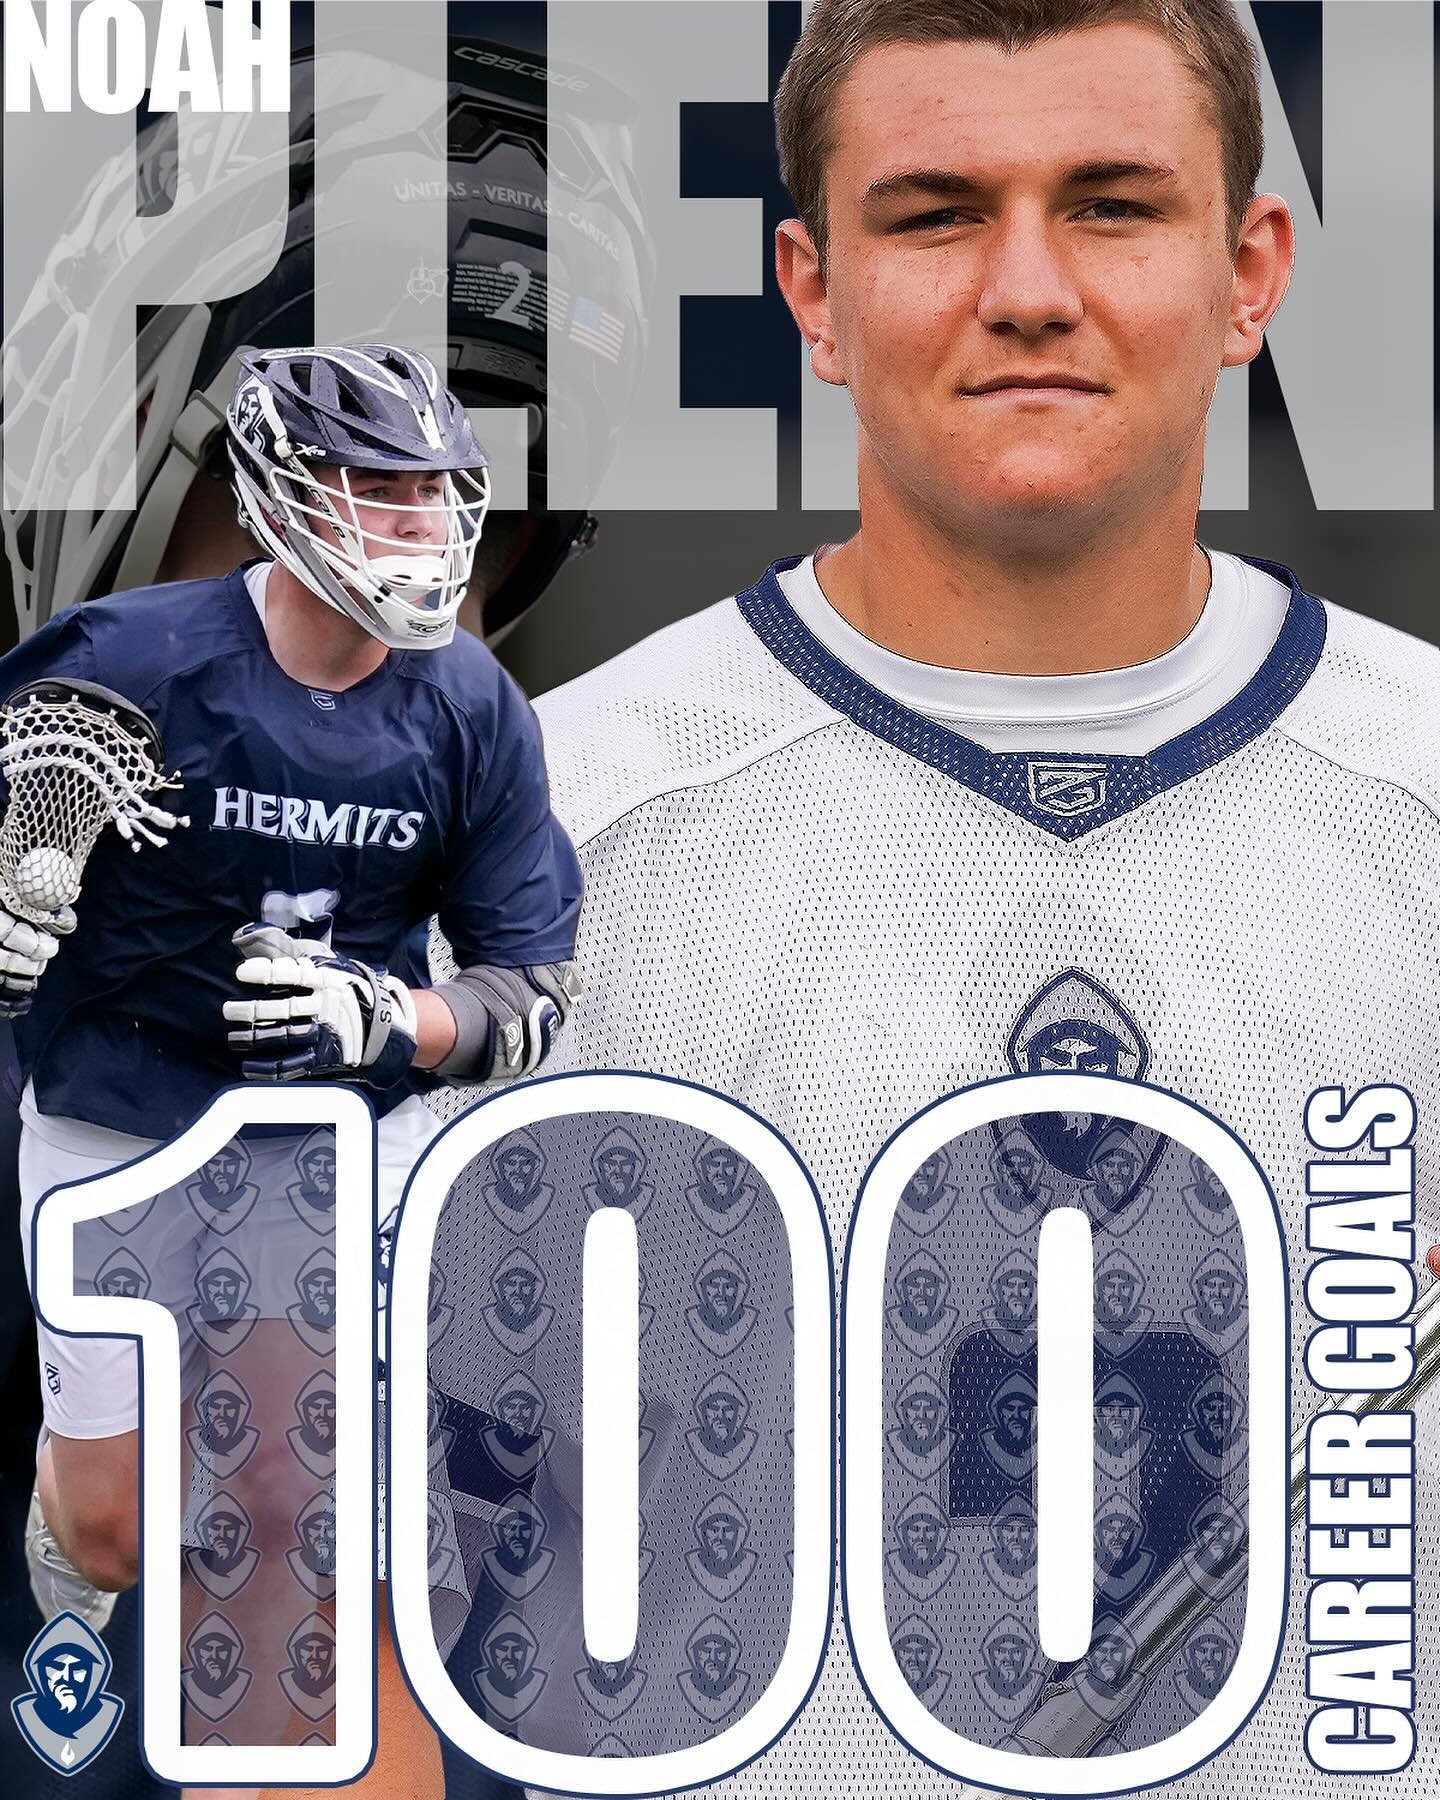 𝟭𝟬𝟬➡️𝟭𝟬𝟭➡️𝟭𝟬𝟮➡️𝟭𝟬𝟯

Big congrats to Noah Plenn on becoming just the 9th player in #HermitsLacrosse history to reach 100 Career Goals! 

👉 𝙎𝙒𝙄𝙋𝙀 𝙏𝙊 𝙎𝙀𝙀 𝙏𝙃𝙀 𝙁𝙐𝙇𝙇 𝙇𝙄𝙎𝙏